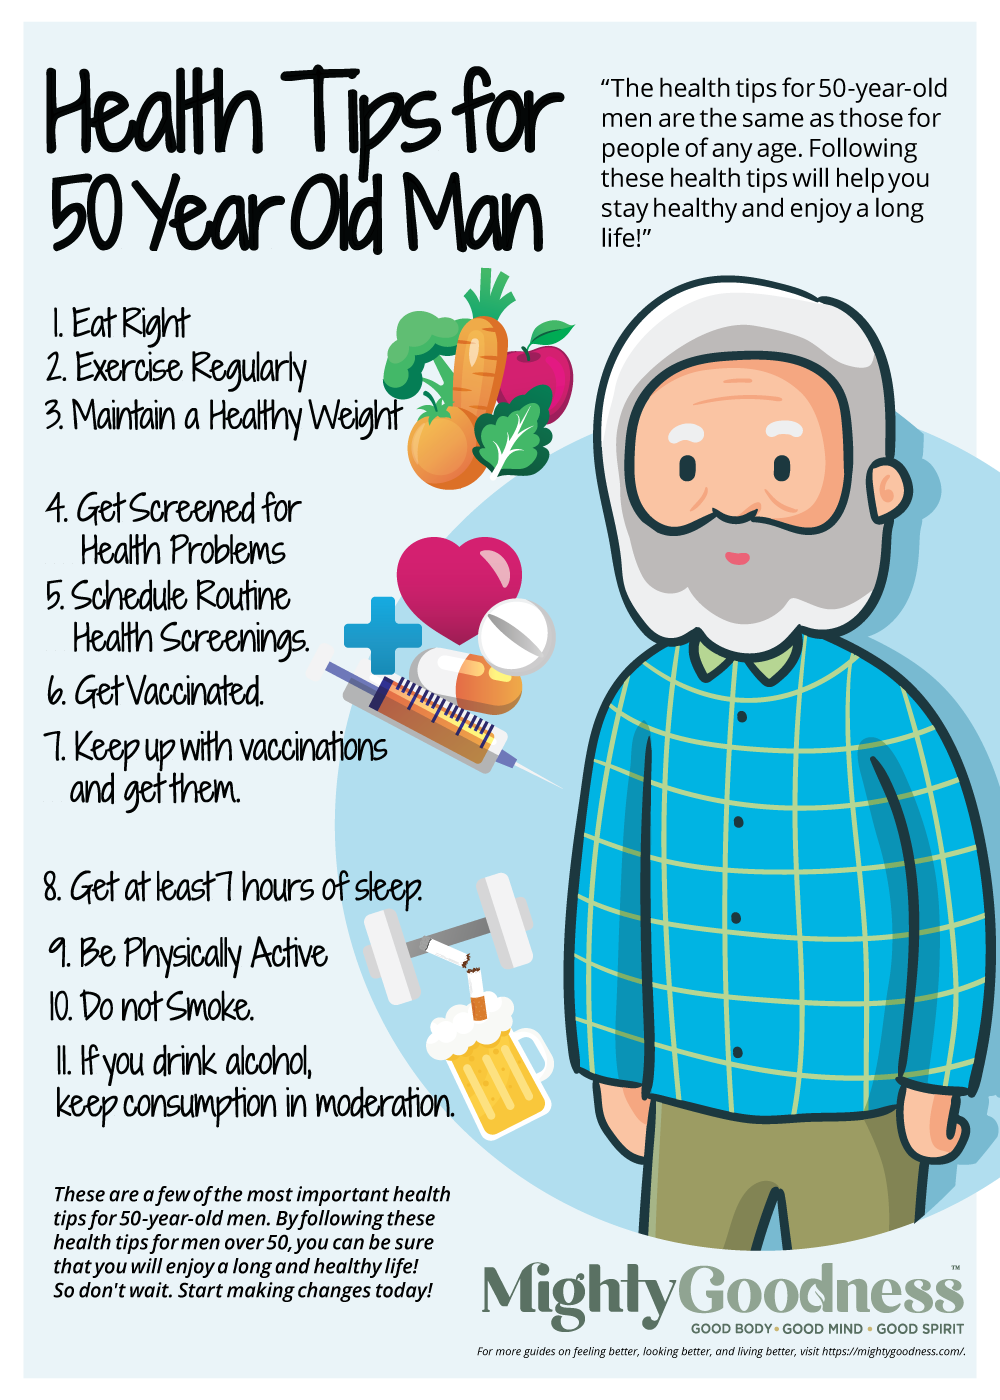 Health Tips for 50 Year Old Man